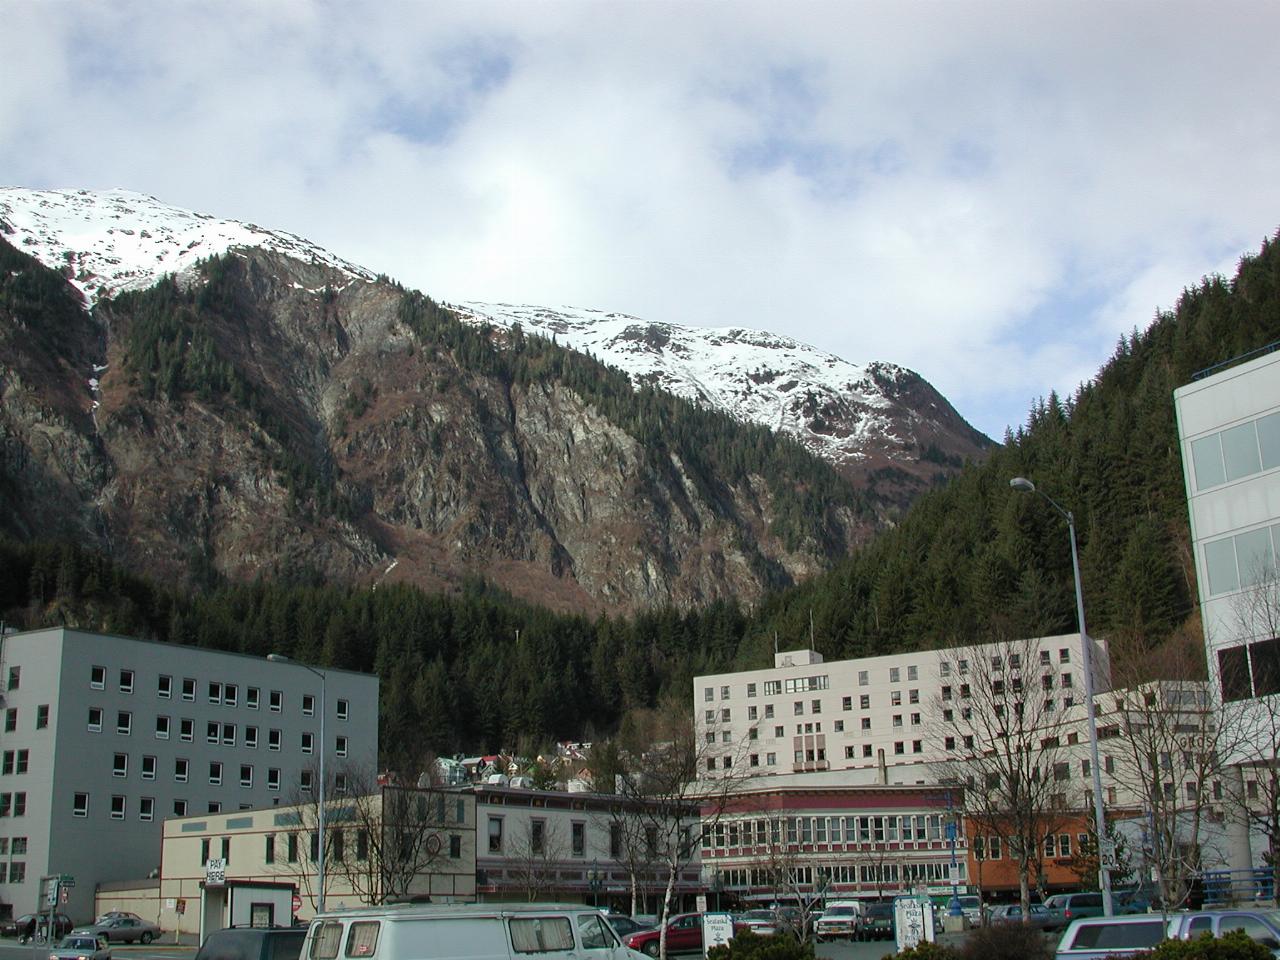 Downtown Juneau, a mix of old and new, and towering mountains